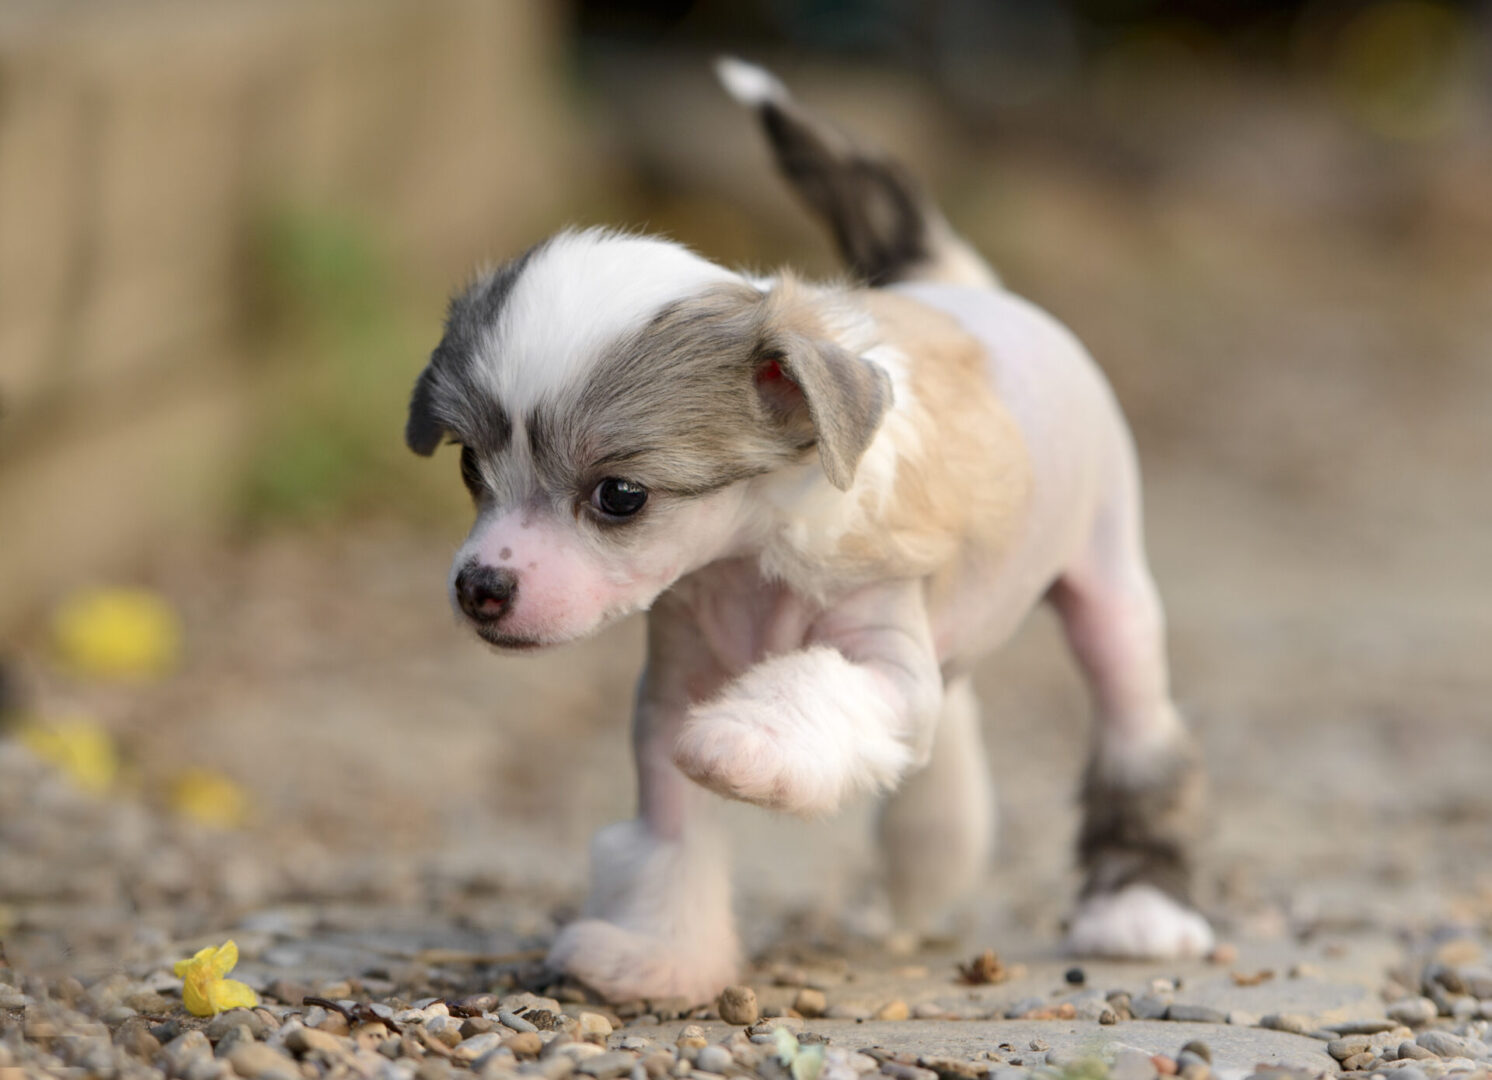 A small dog is running on the ground